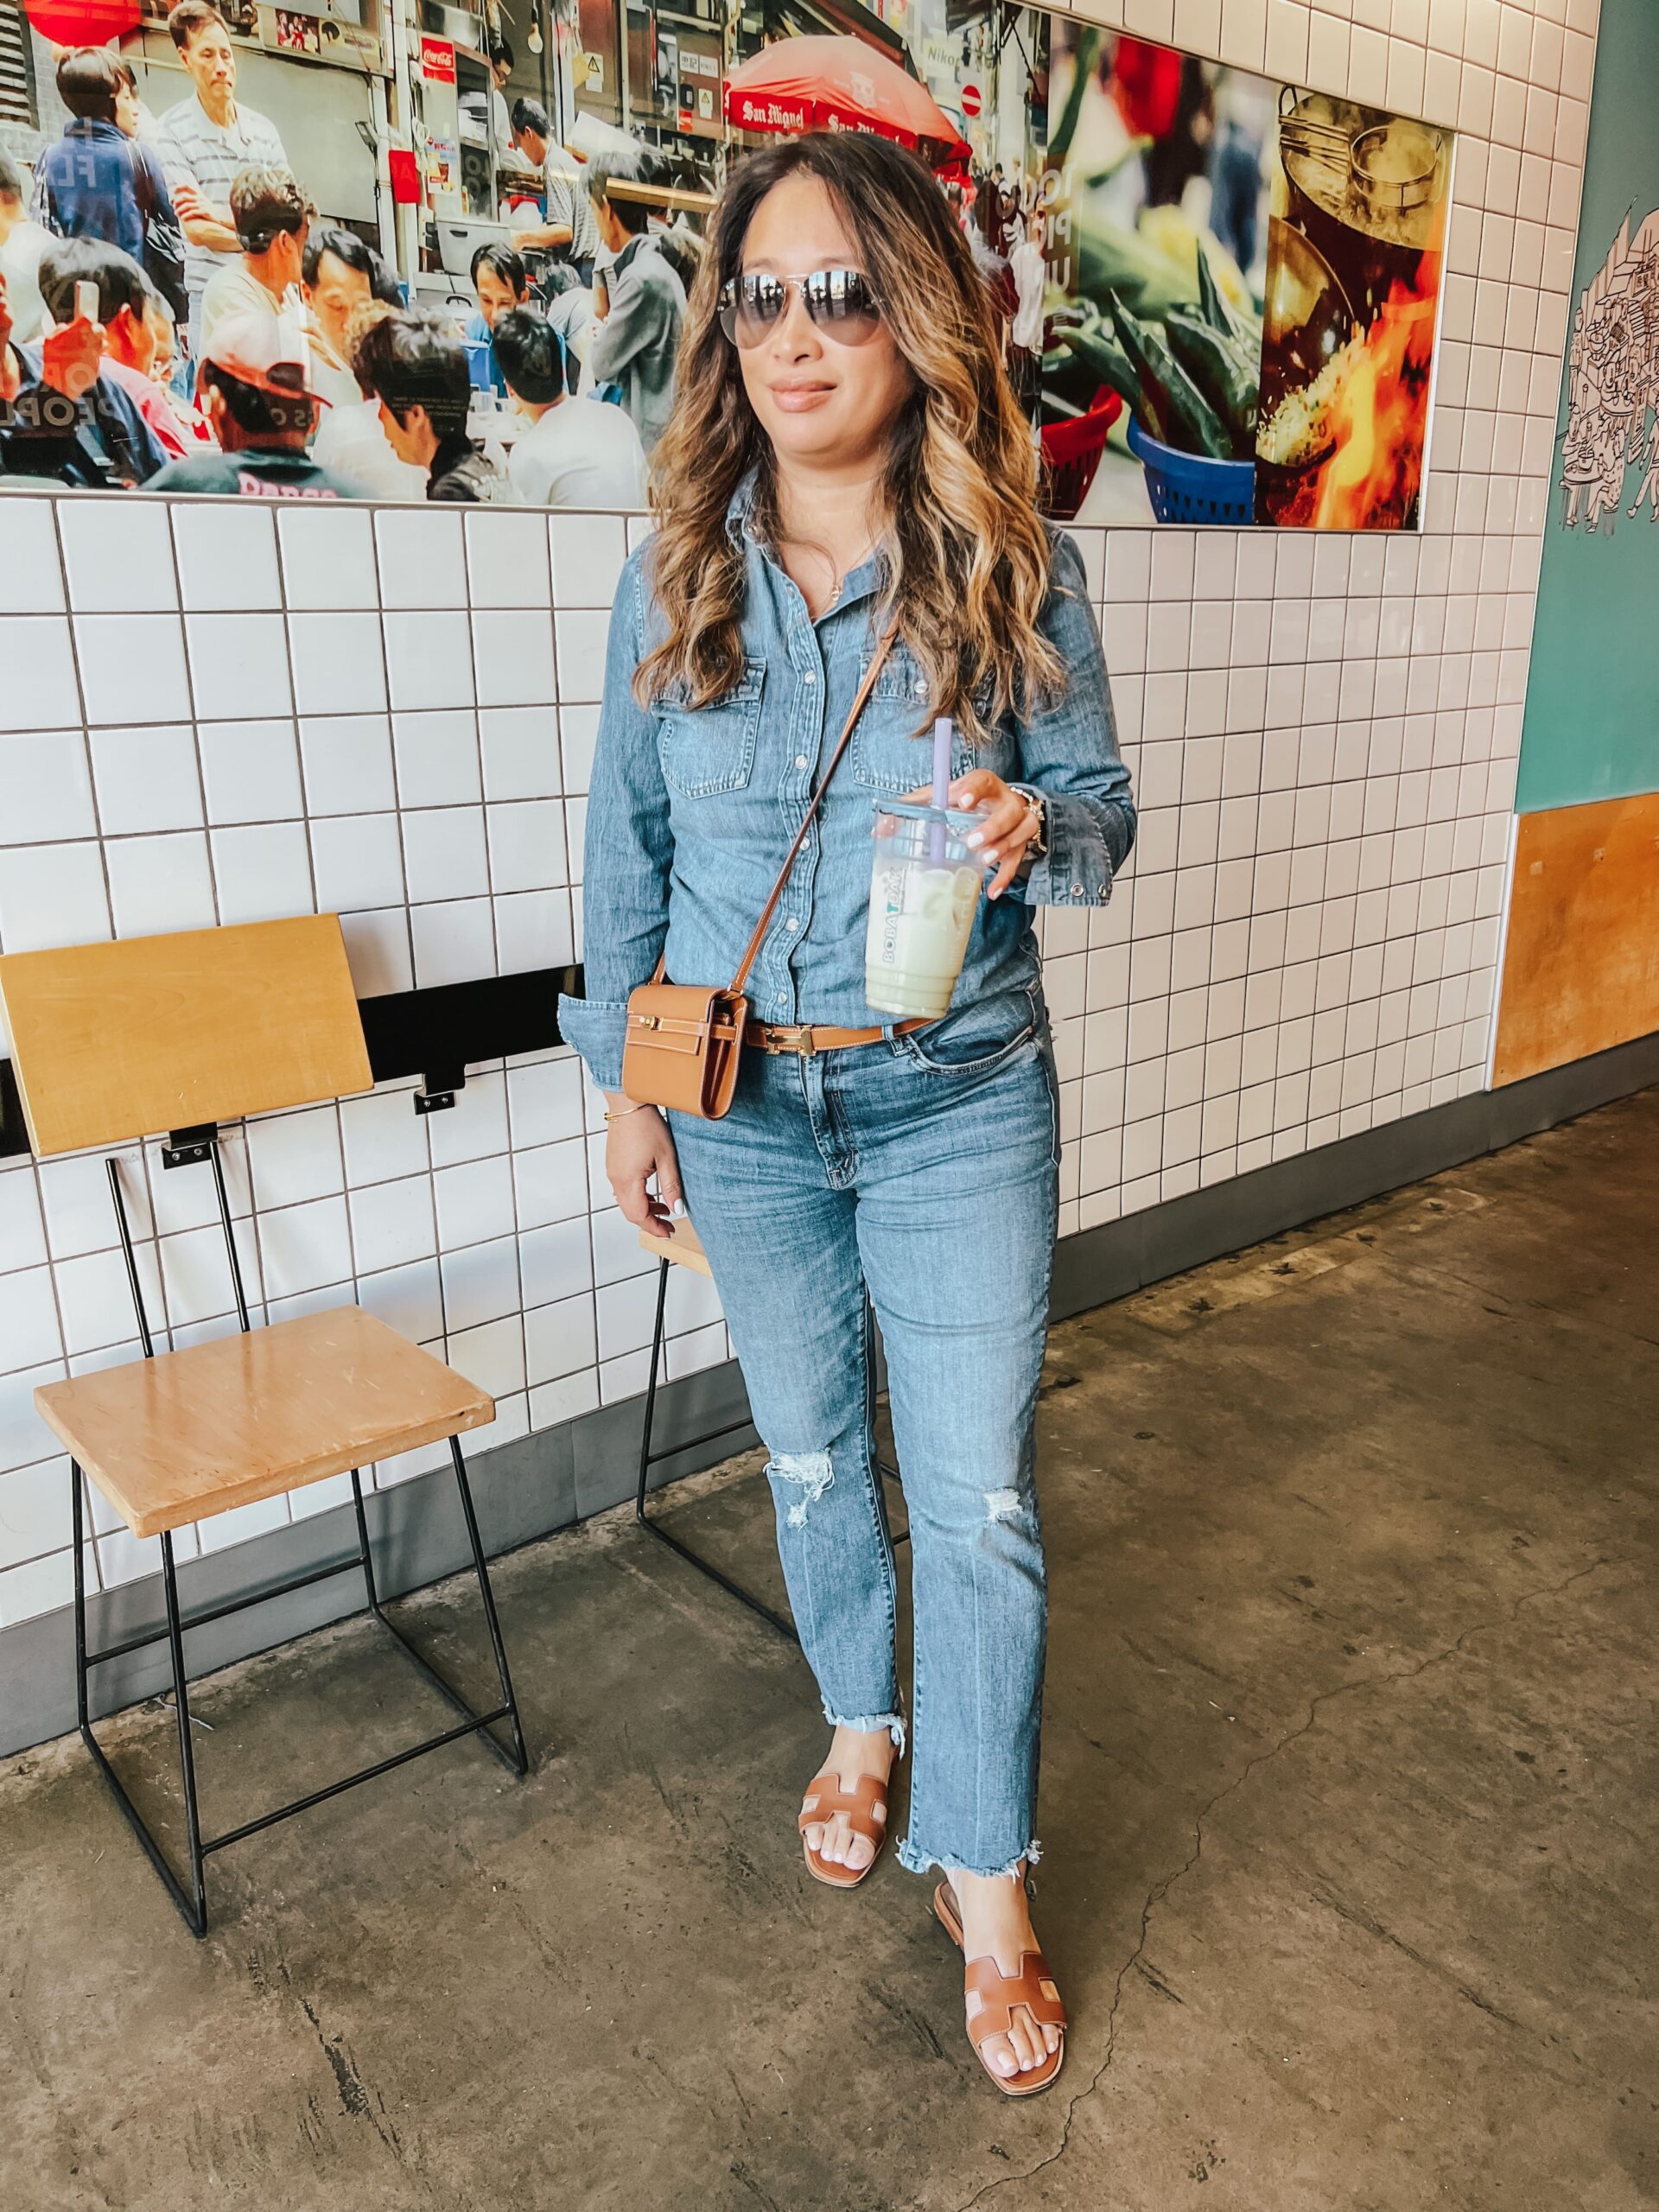 The Most Popular Denim Bags to Buy in 2023 - Academy by FASHIONPHILE